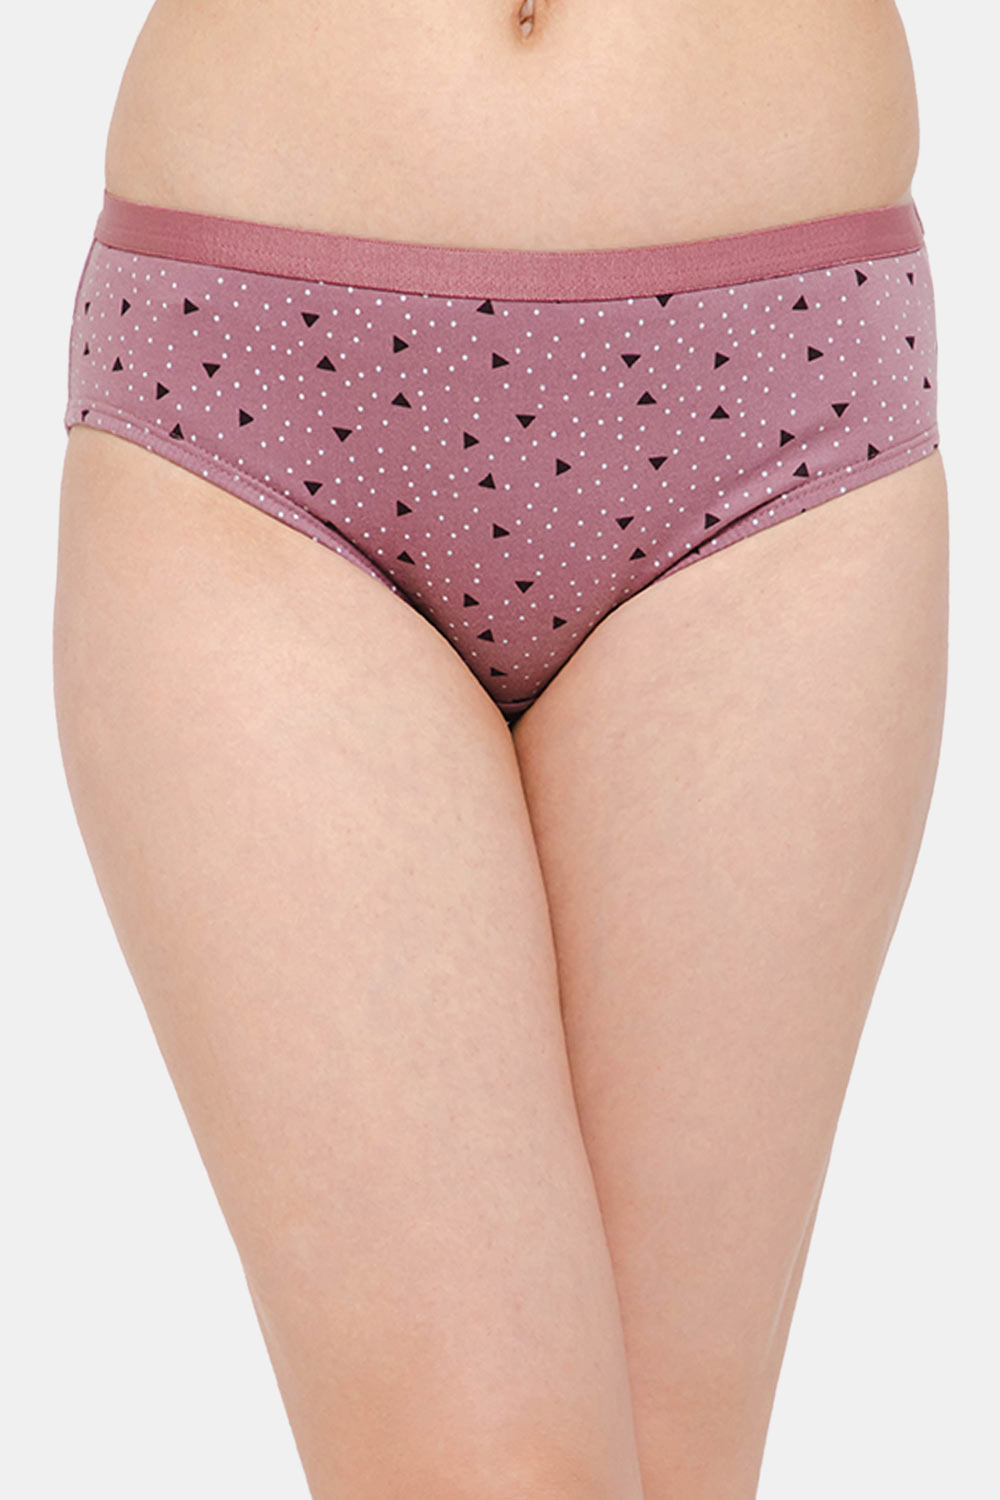 Cotton Printed Women Lingerie and Underwear, Briefs at Rs 44/piece